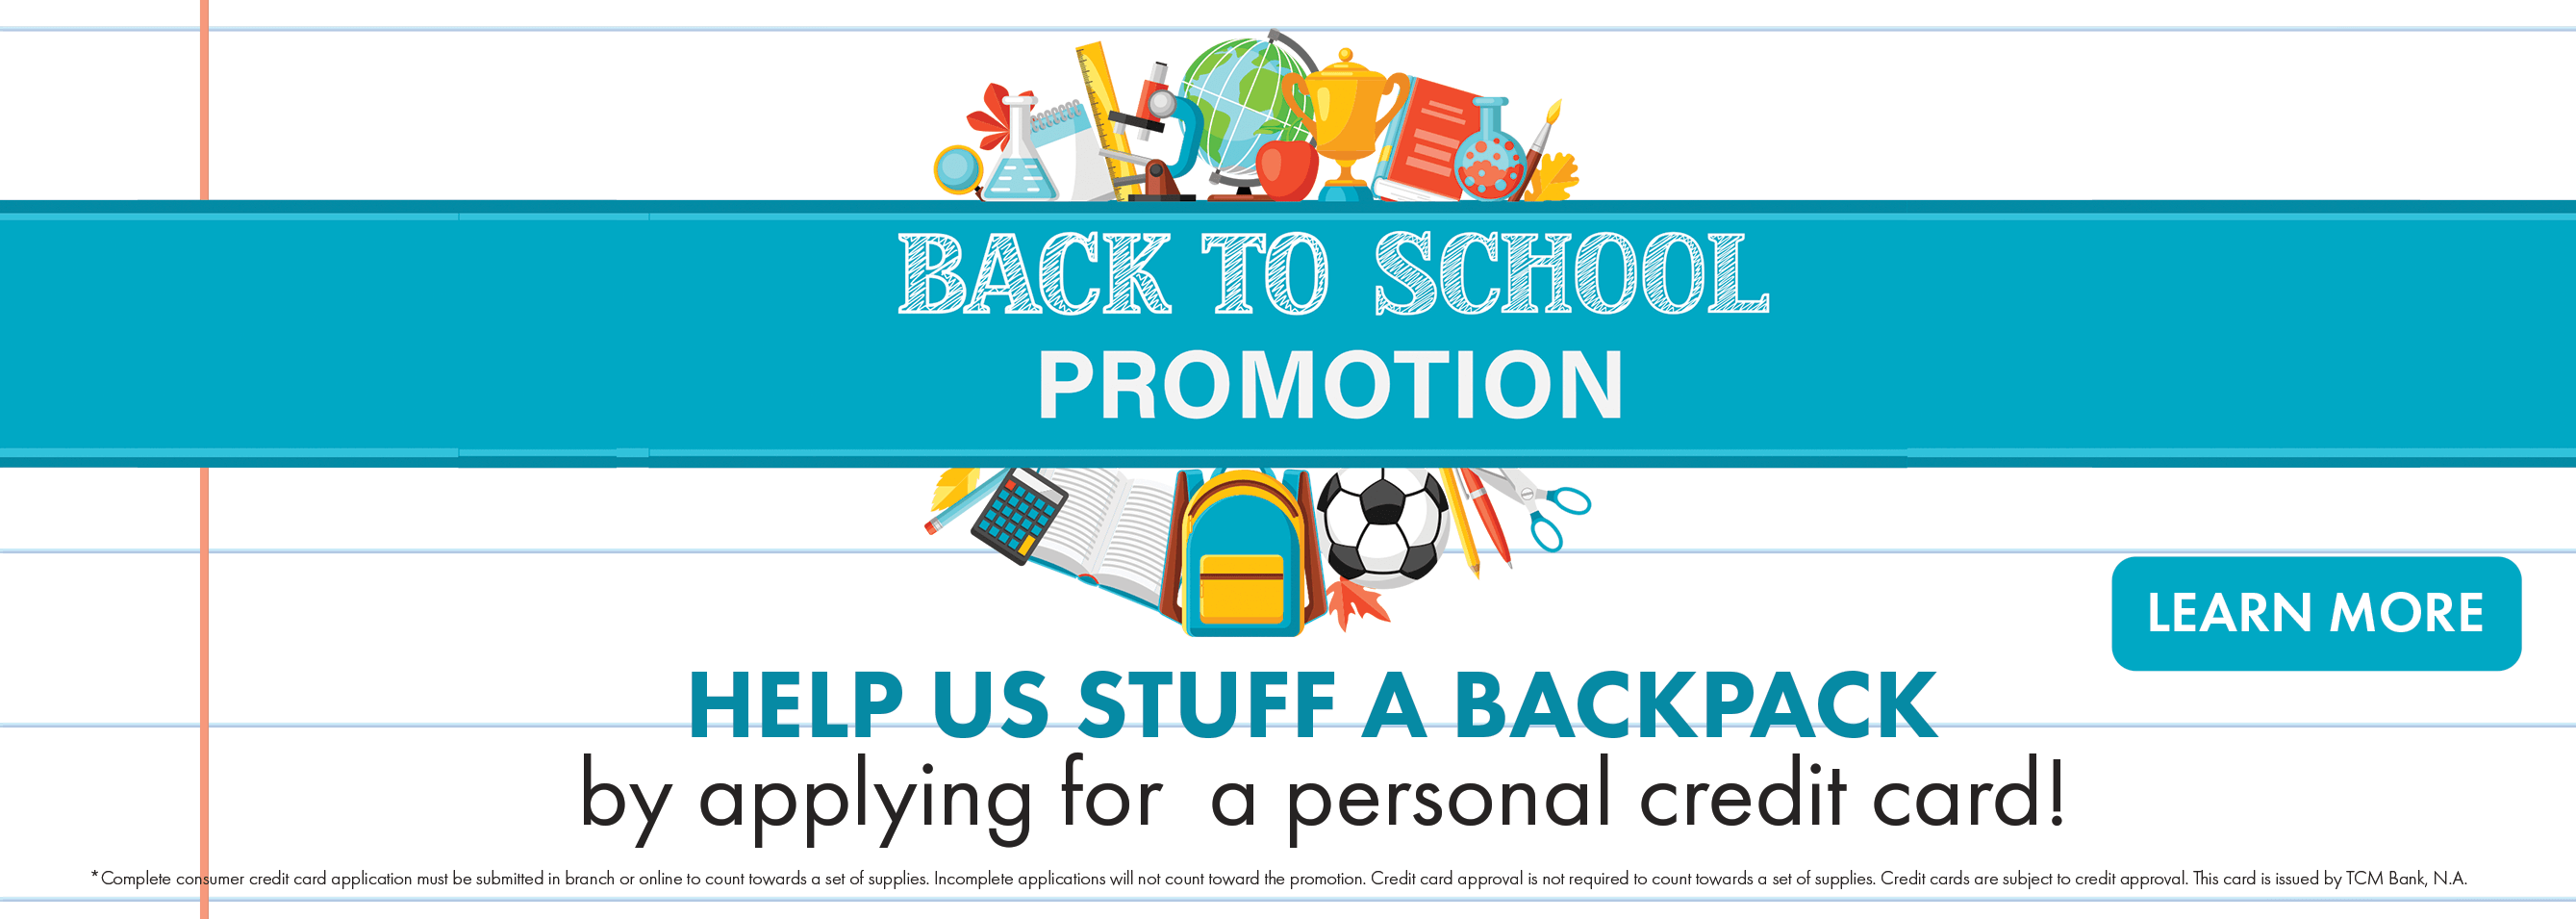 Apply for a personal credit card and we donate a backpack of school supplies